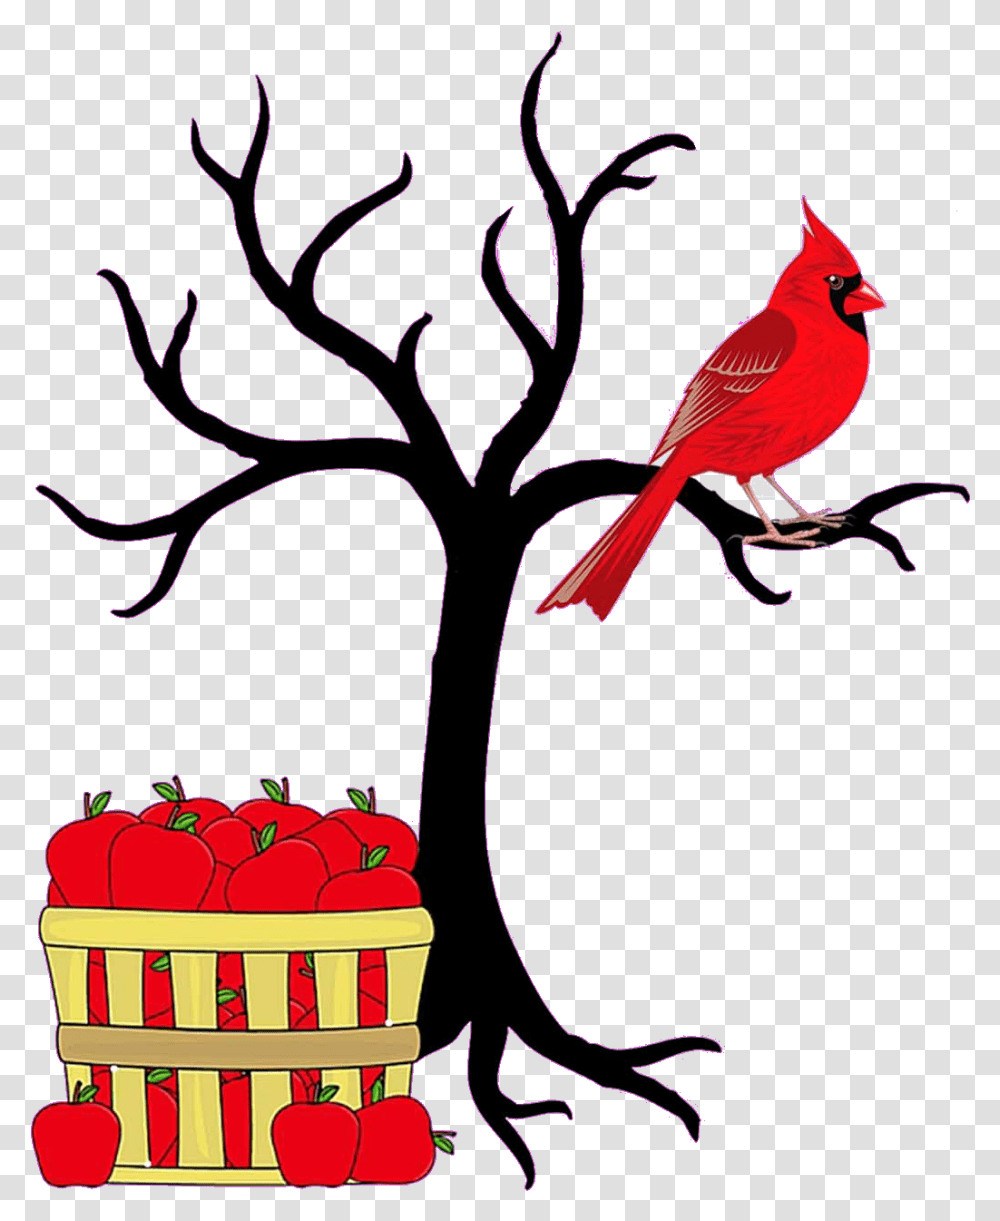 Cardinal On Branch Clipart Hunger Games Quotes, Bird, Animal, Plant Transparent Png